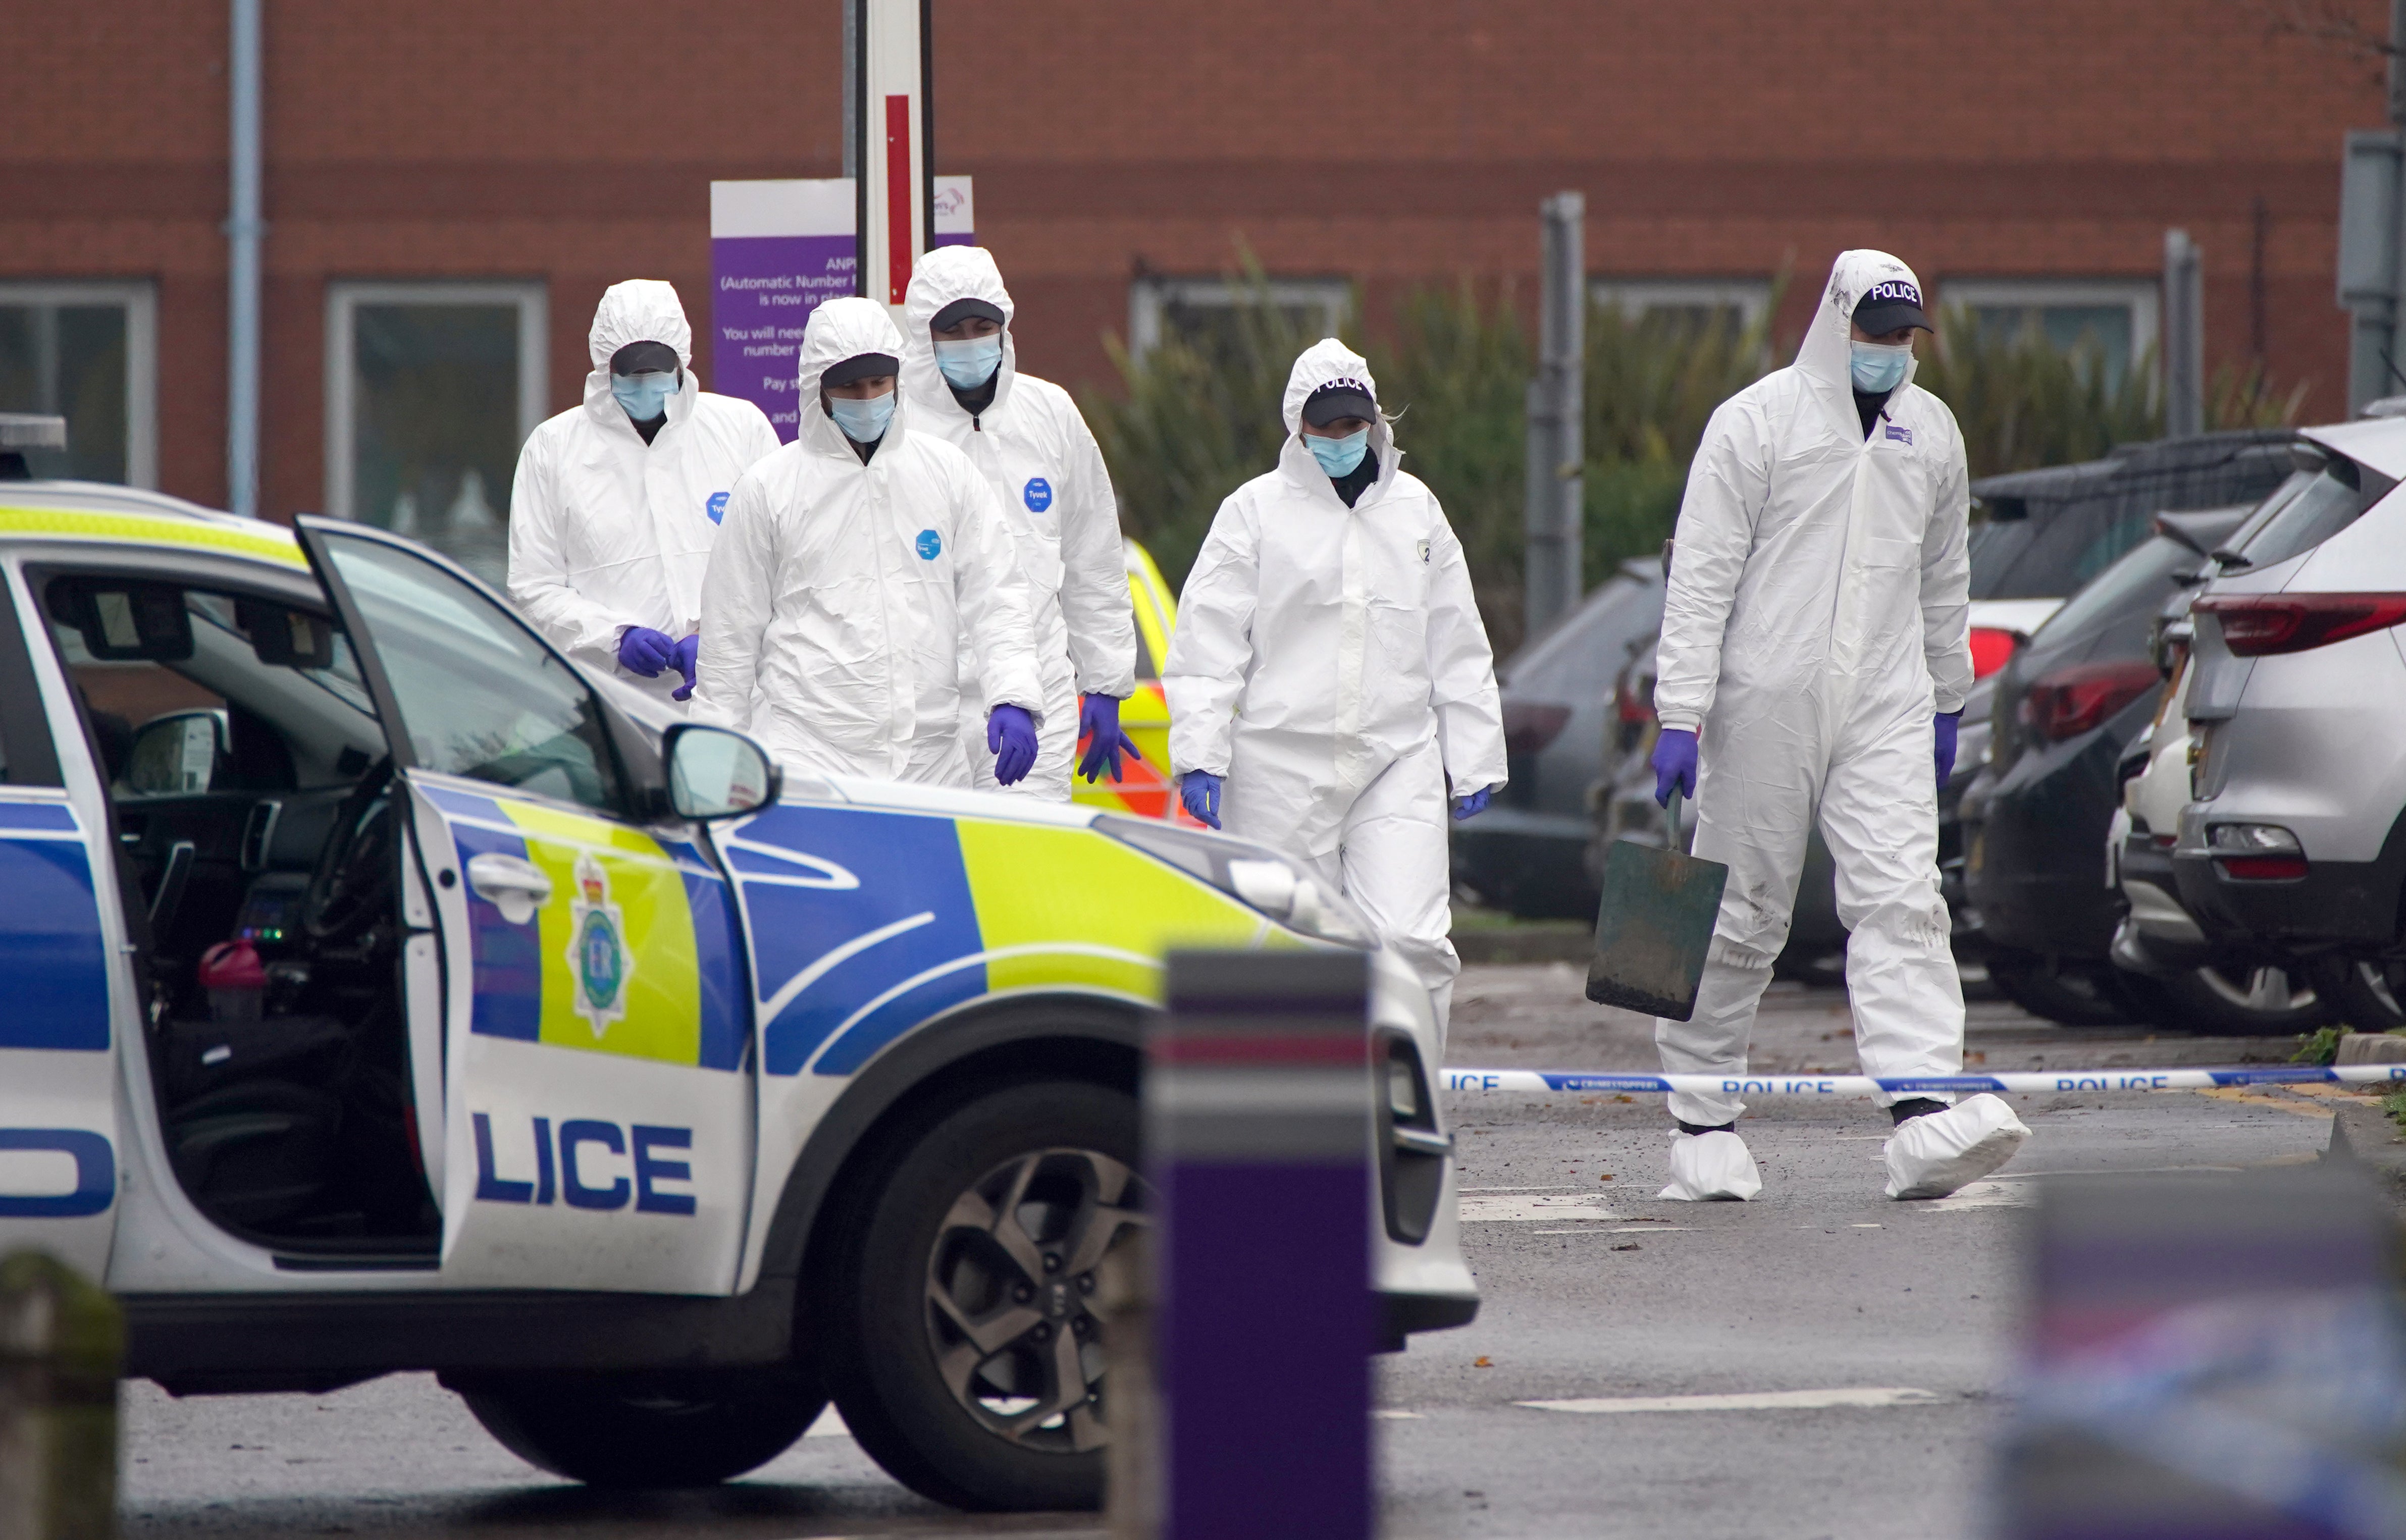 The threat level had been raised in November following the Liverpool Women’s Hospital bombing